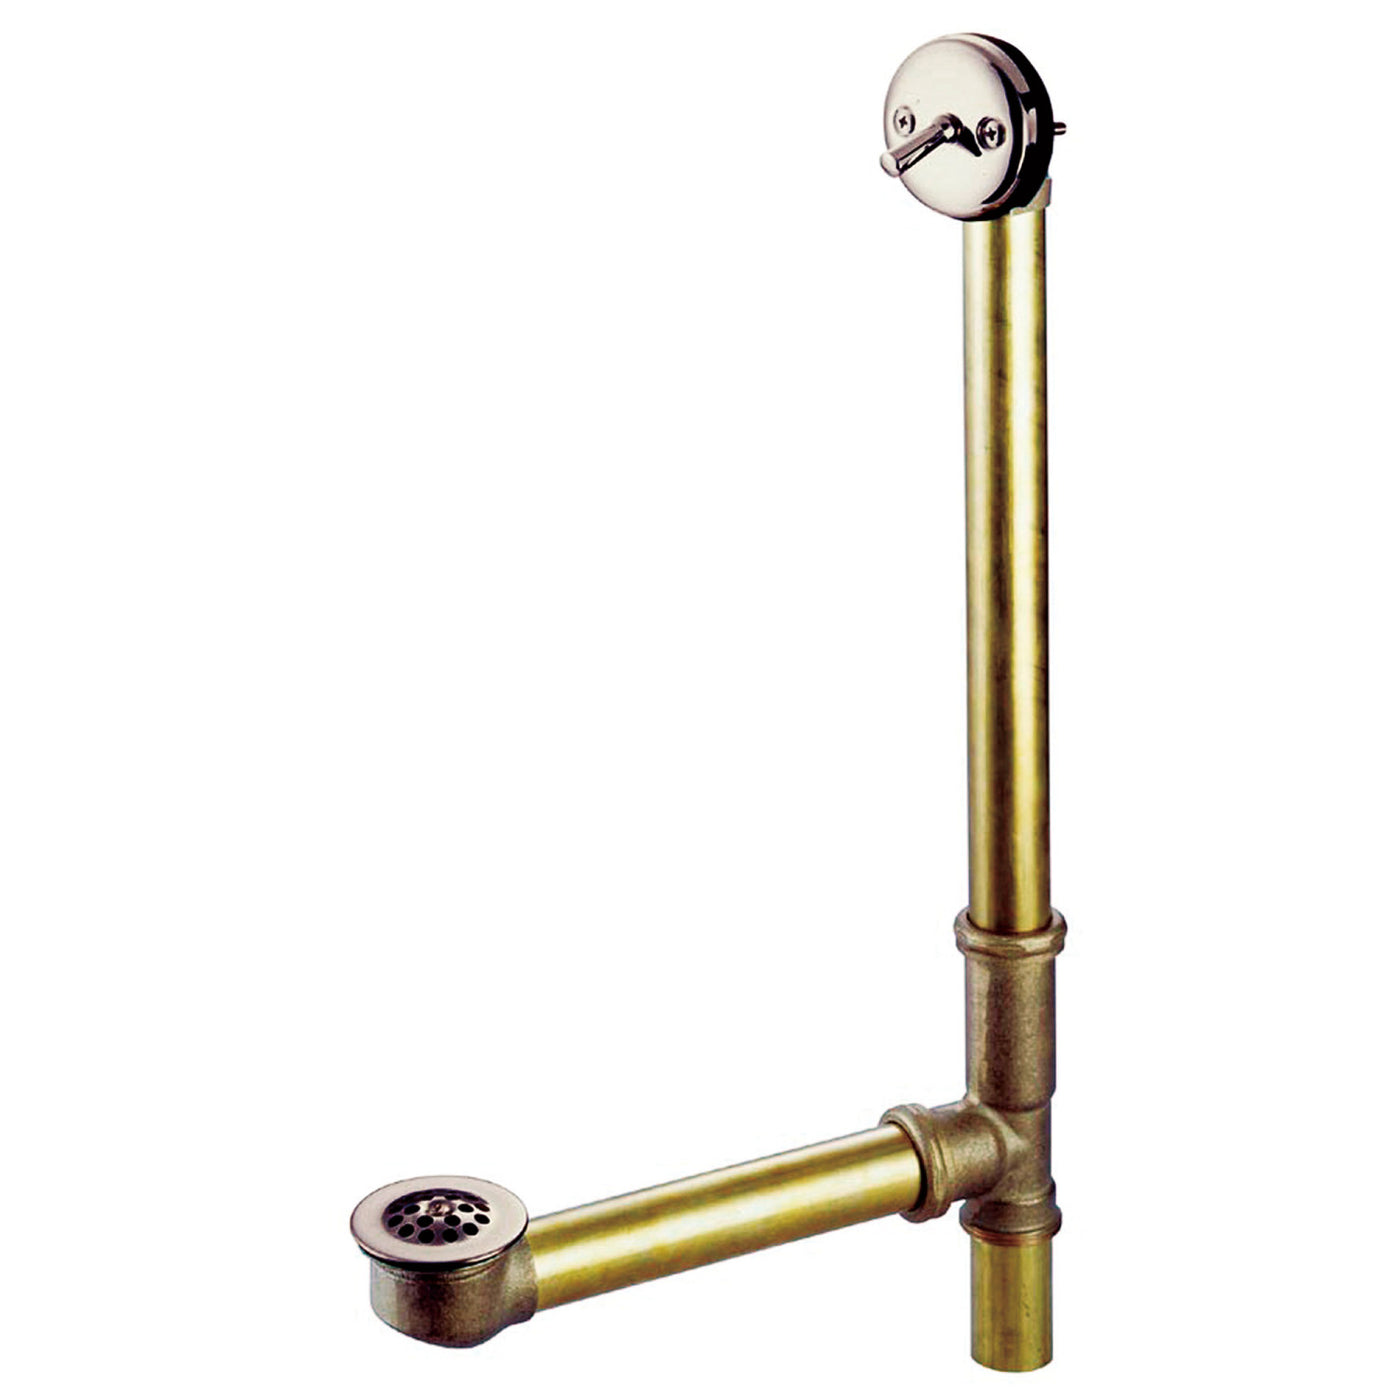 Elements of Design EDTL1188 23-Inch Trip Lever Waste and Overflow with Grid, 20 Gauge, Brushed Nickel